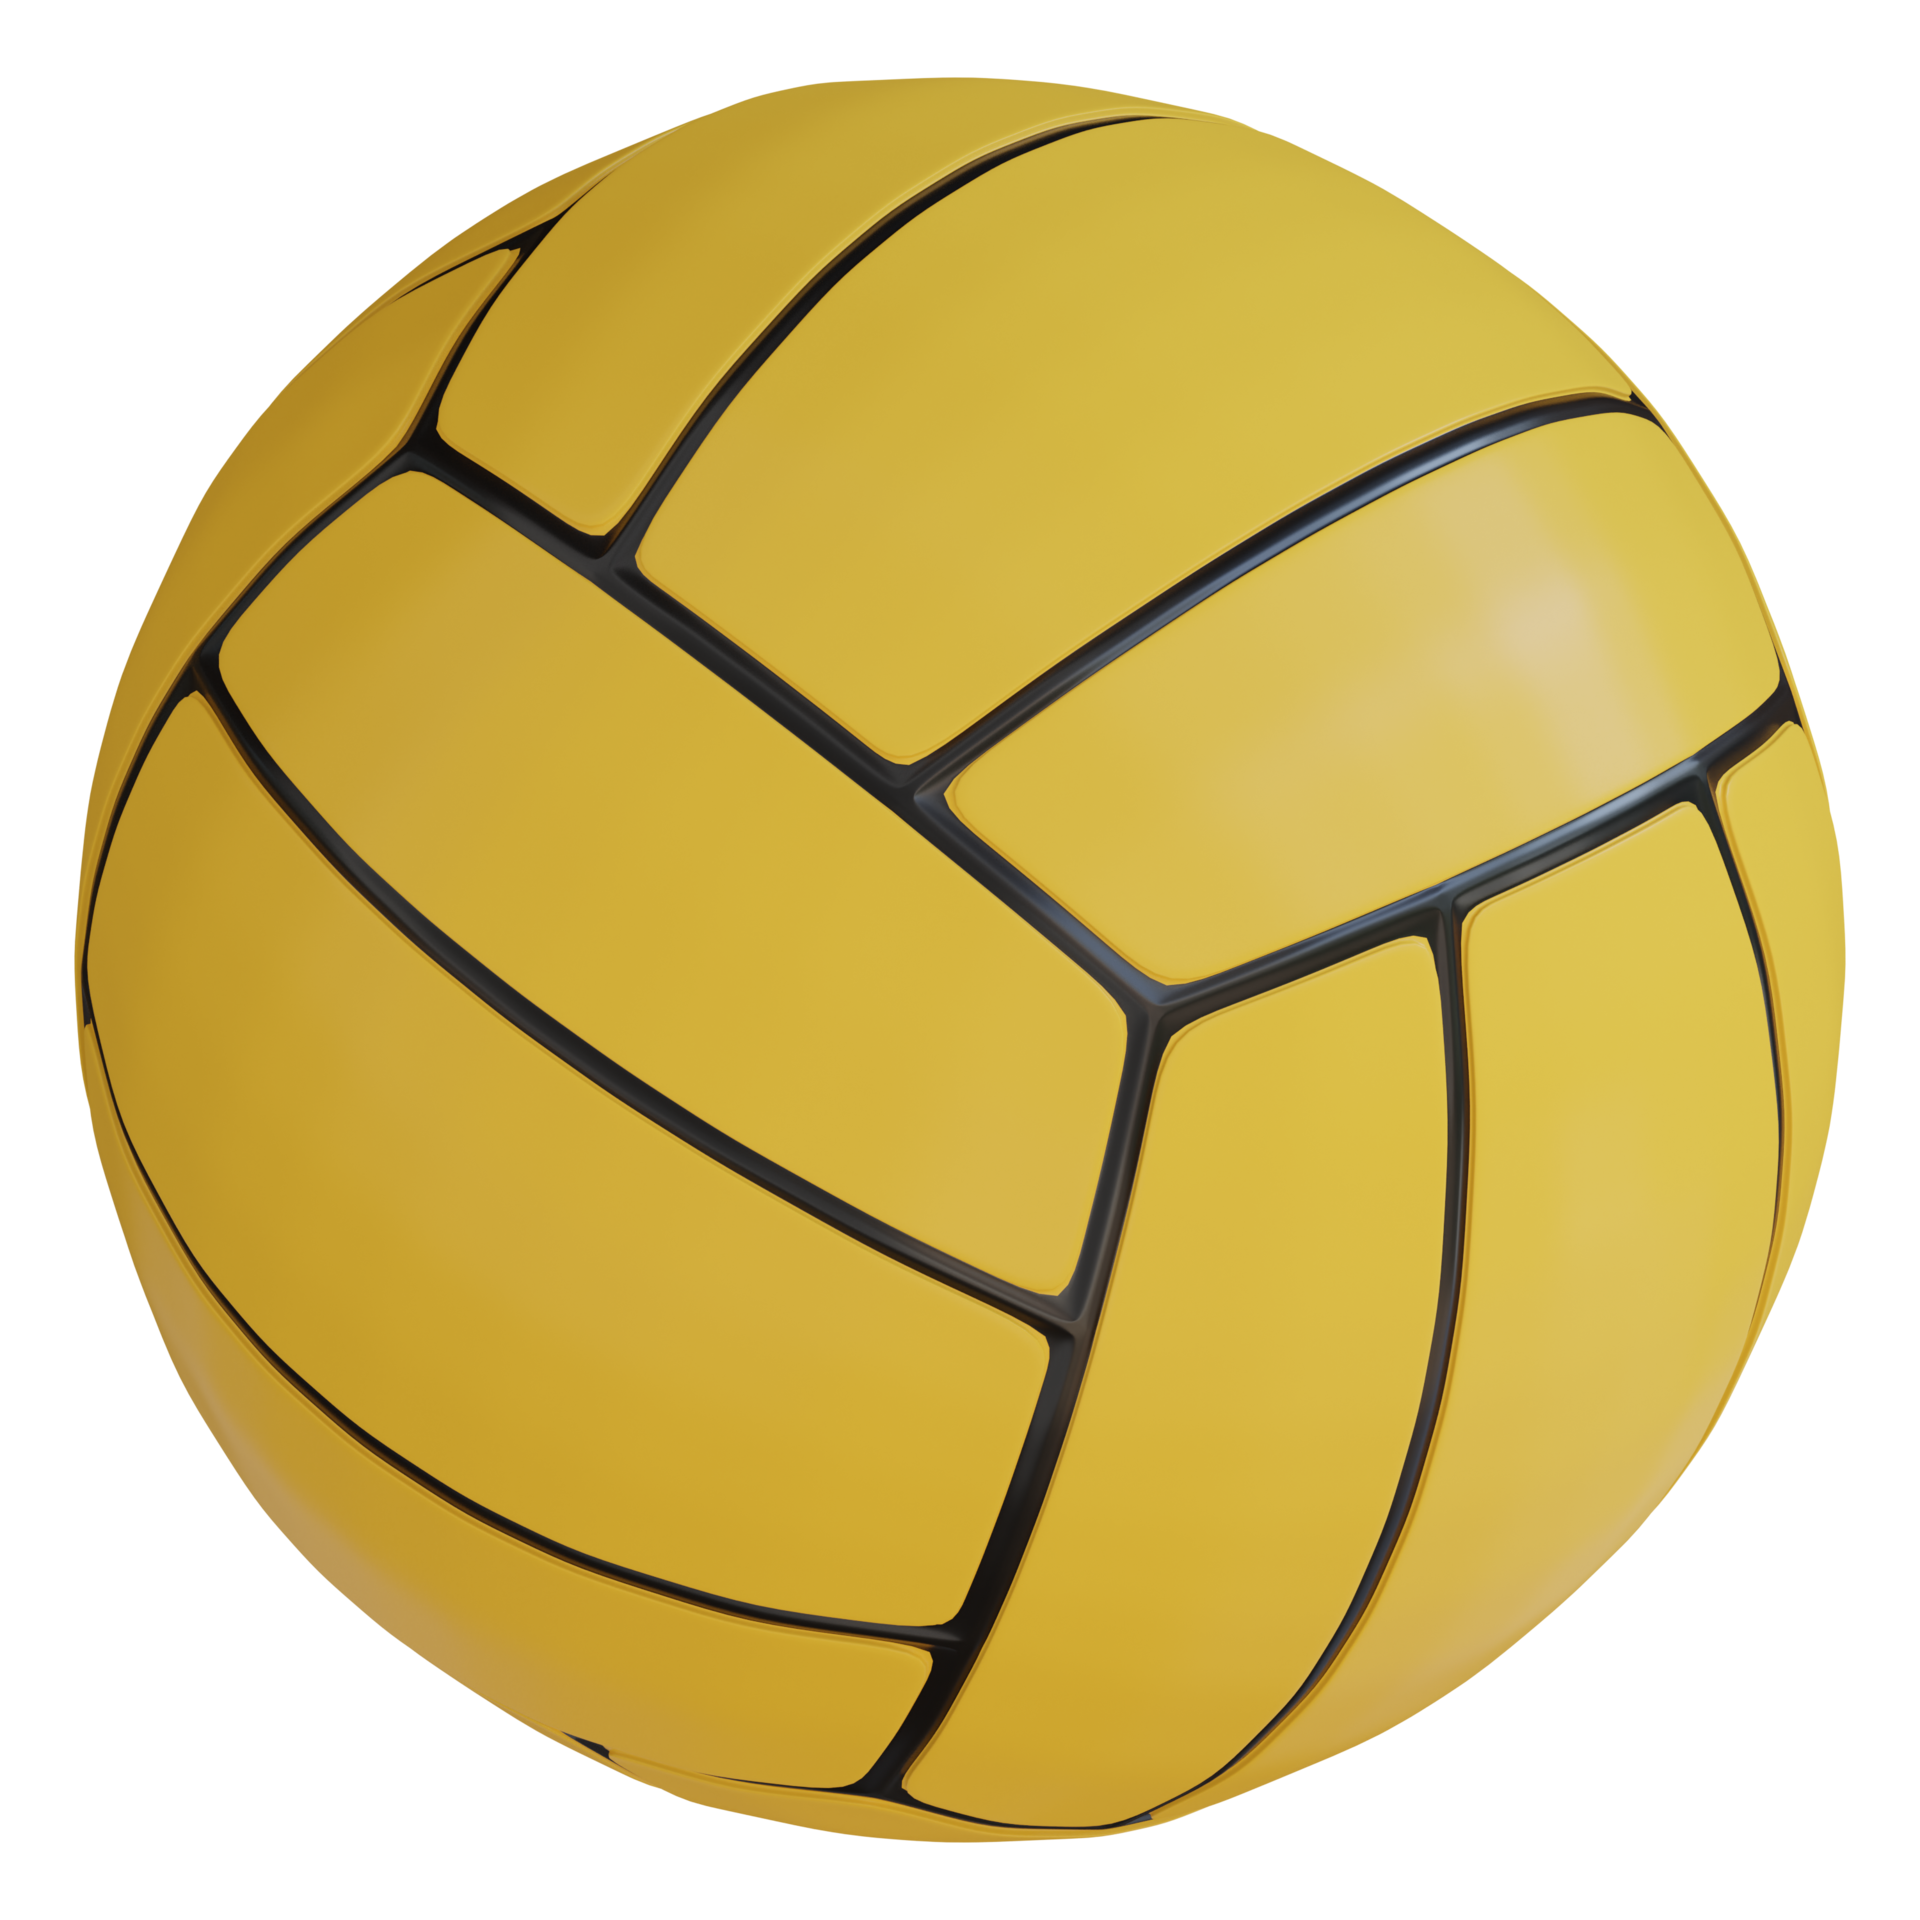 Free Water Polo Ball 3D Render Icon 14919492 PNG with Transparent Background